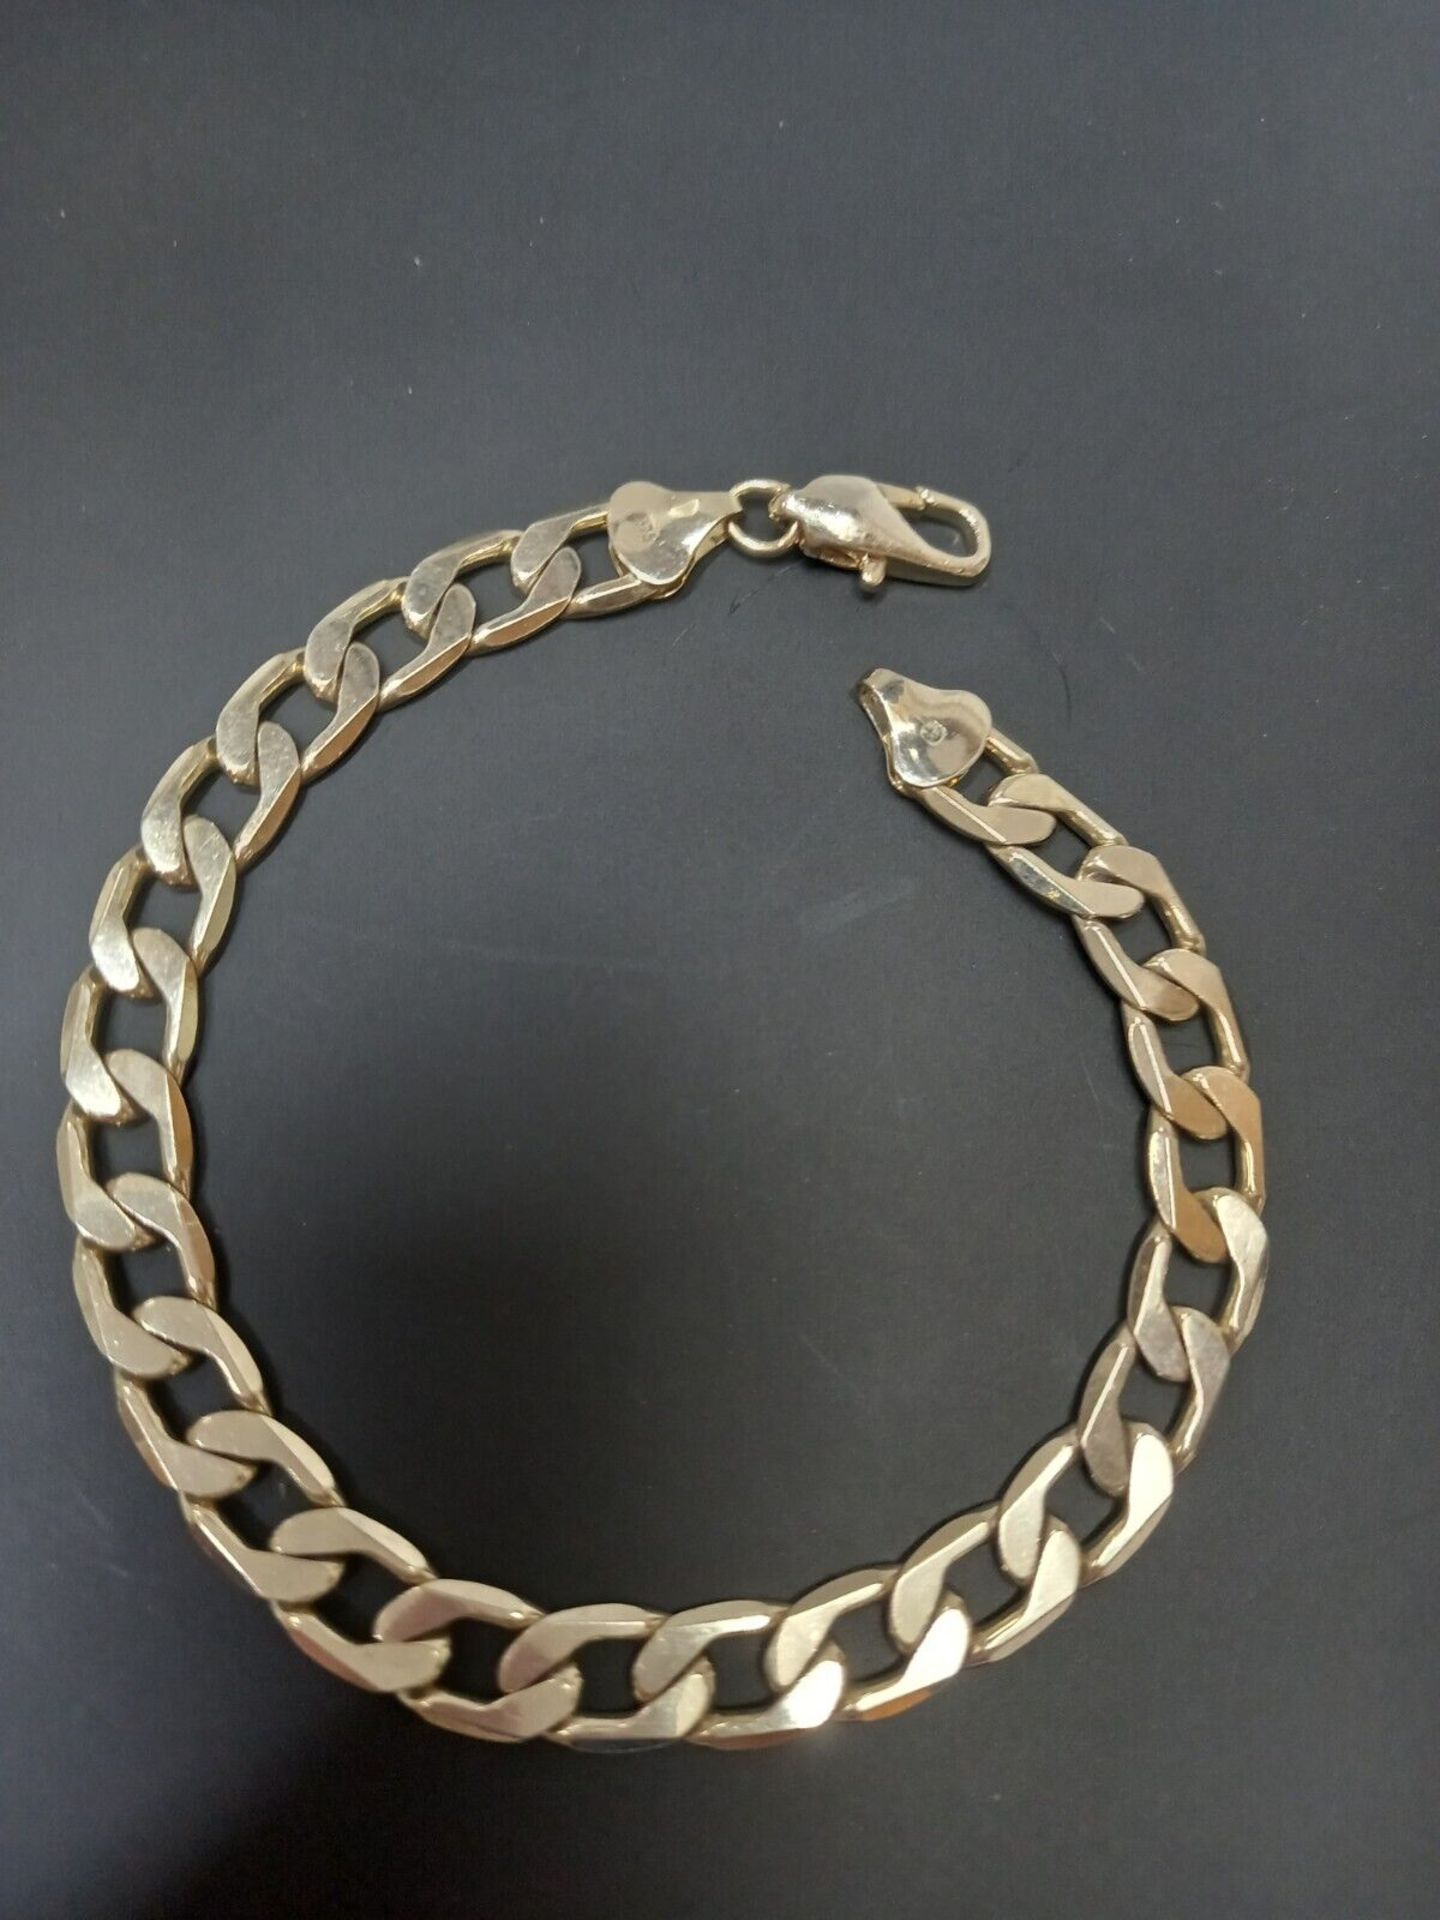 YELLOW GOLD PLATED GENTS BRACELET, 925 STERLING SILVER, 8.5INCH, CURB BRACELET